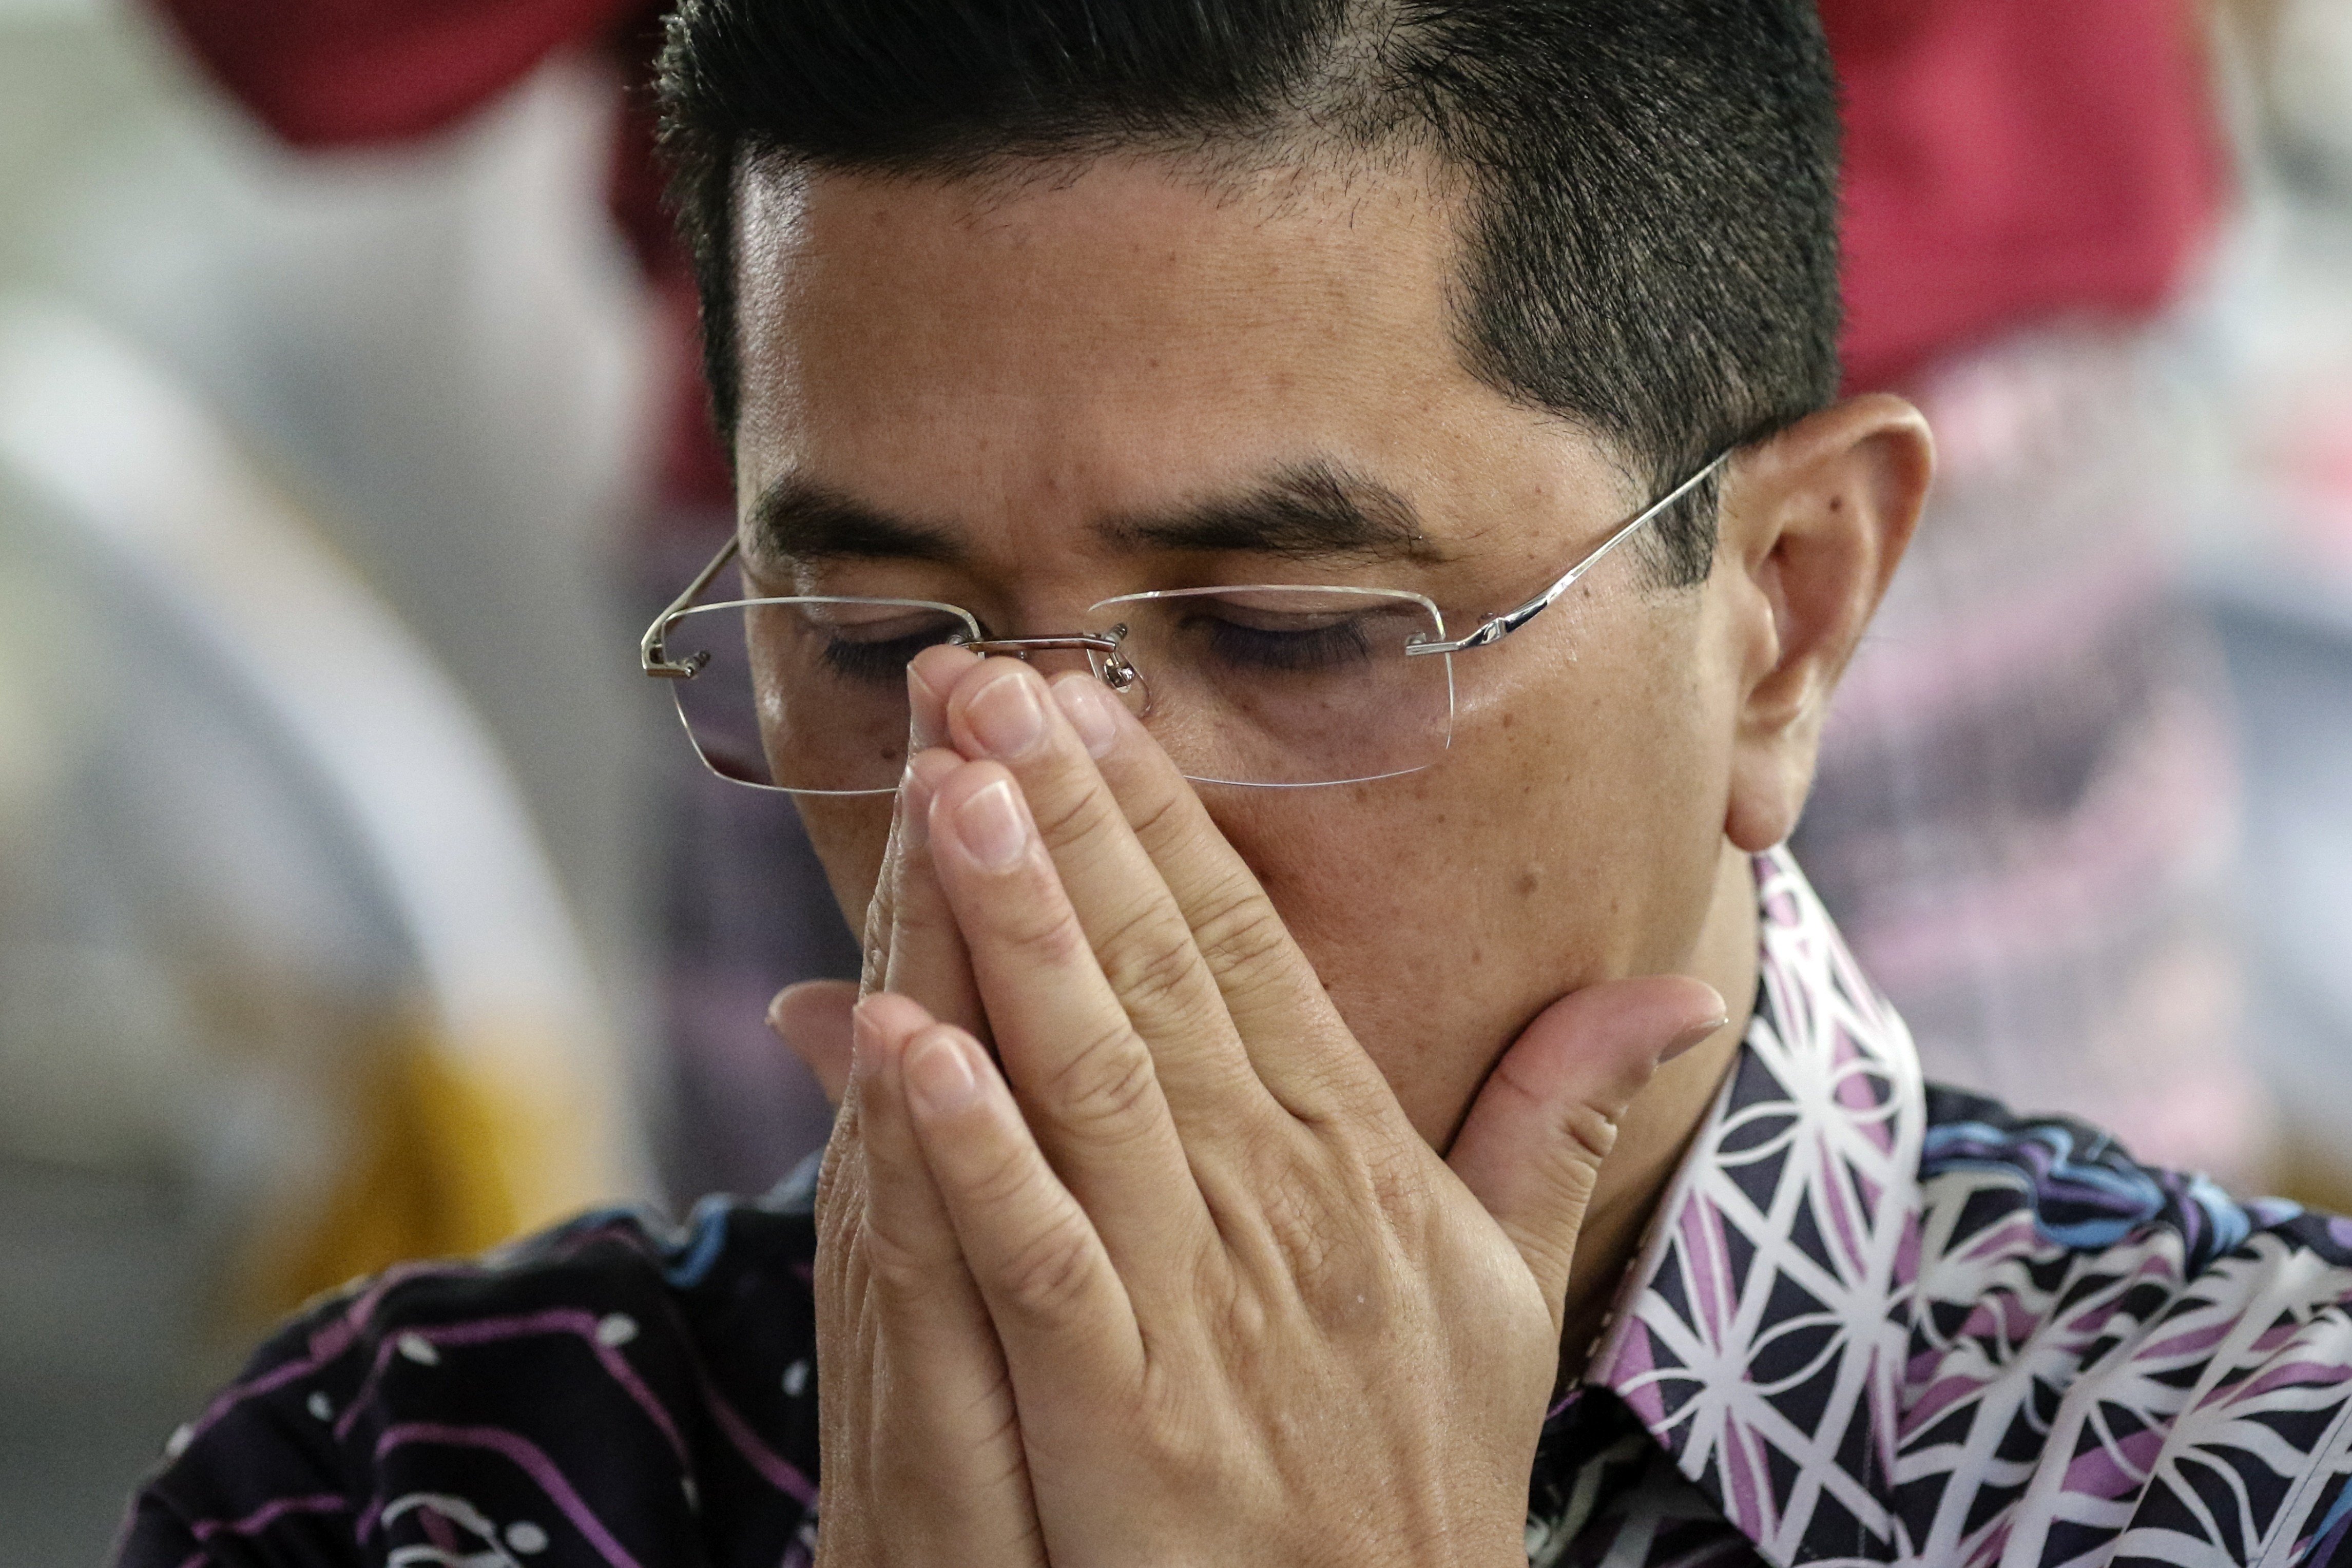 Malaysia’s Economic Affairs Minister Azmin Ali prays at an event at his constituency in Kuala Lumpur. He has denied all the accusations that link him to a sex scandal video. Photo: EPA